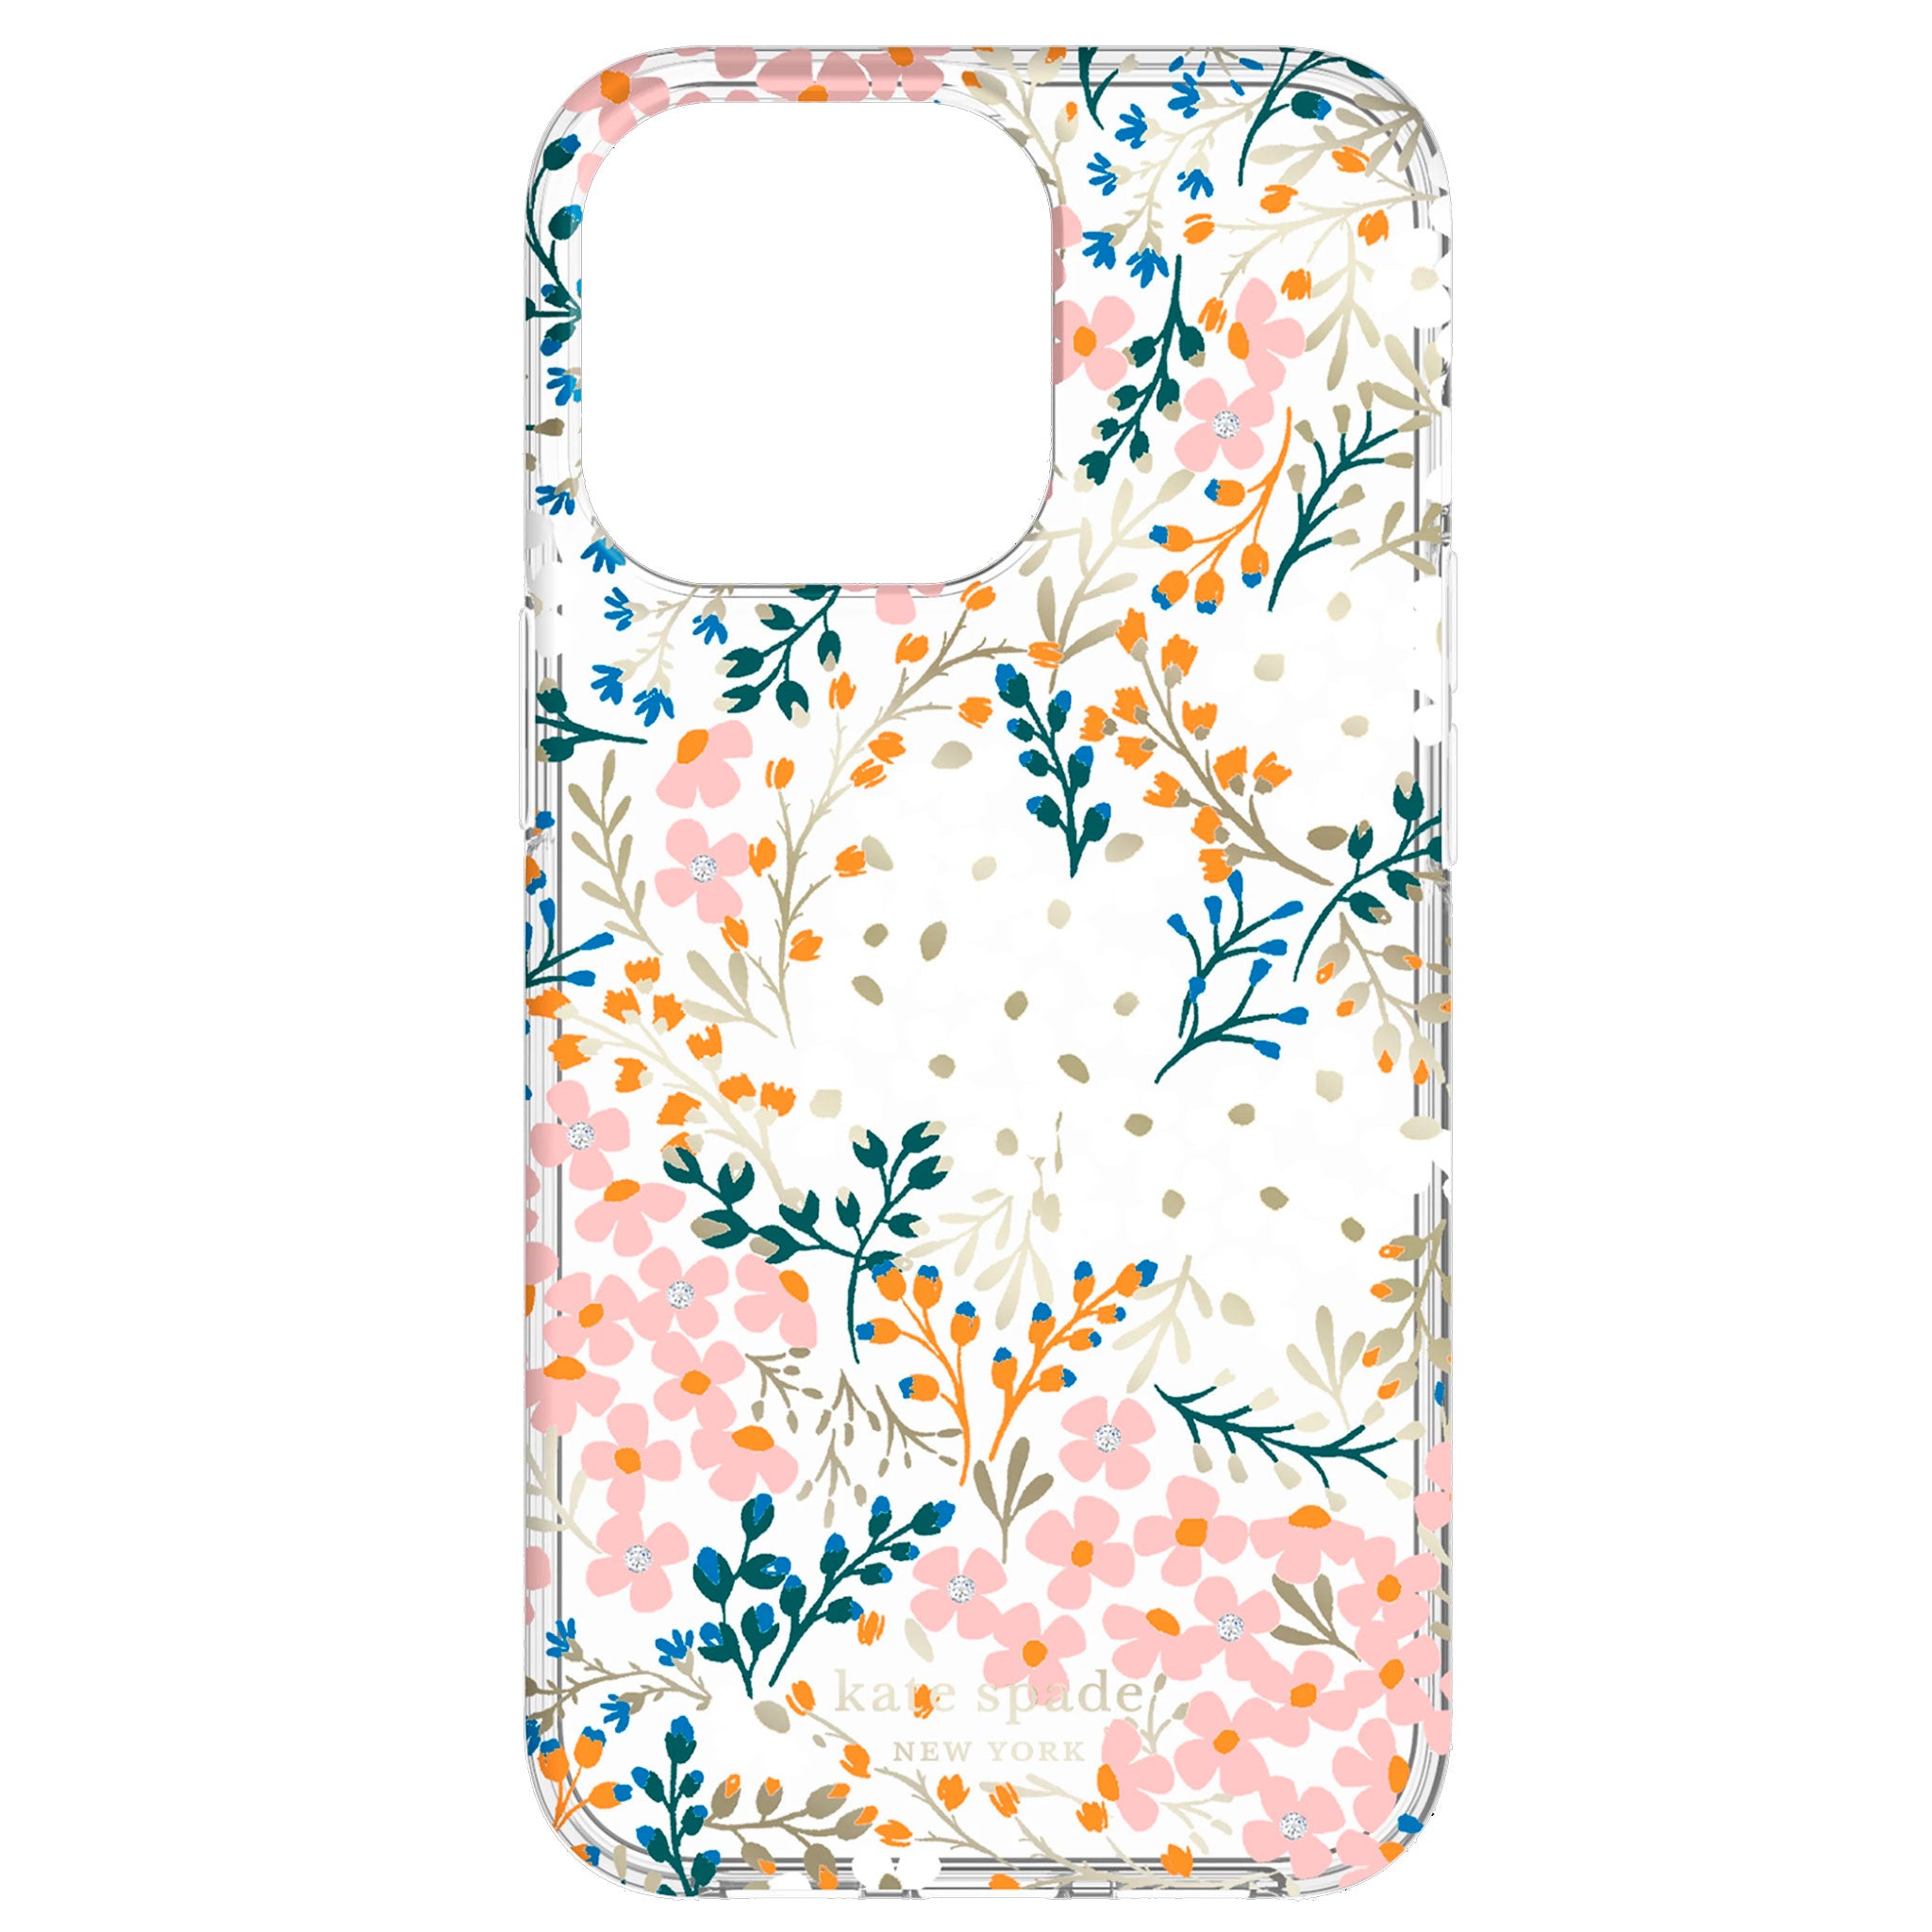 Kate Spade - Hardshell Case For Apple iPhone 13 Pro - Multi Floral Rose And Pacific Green